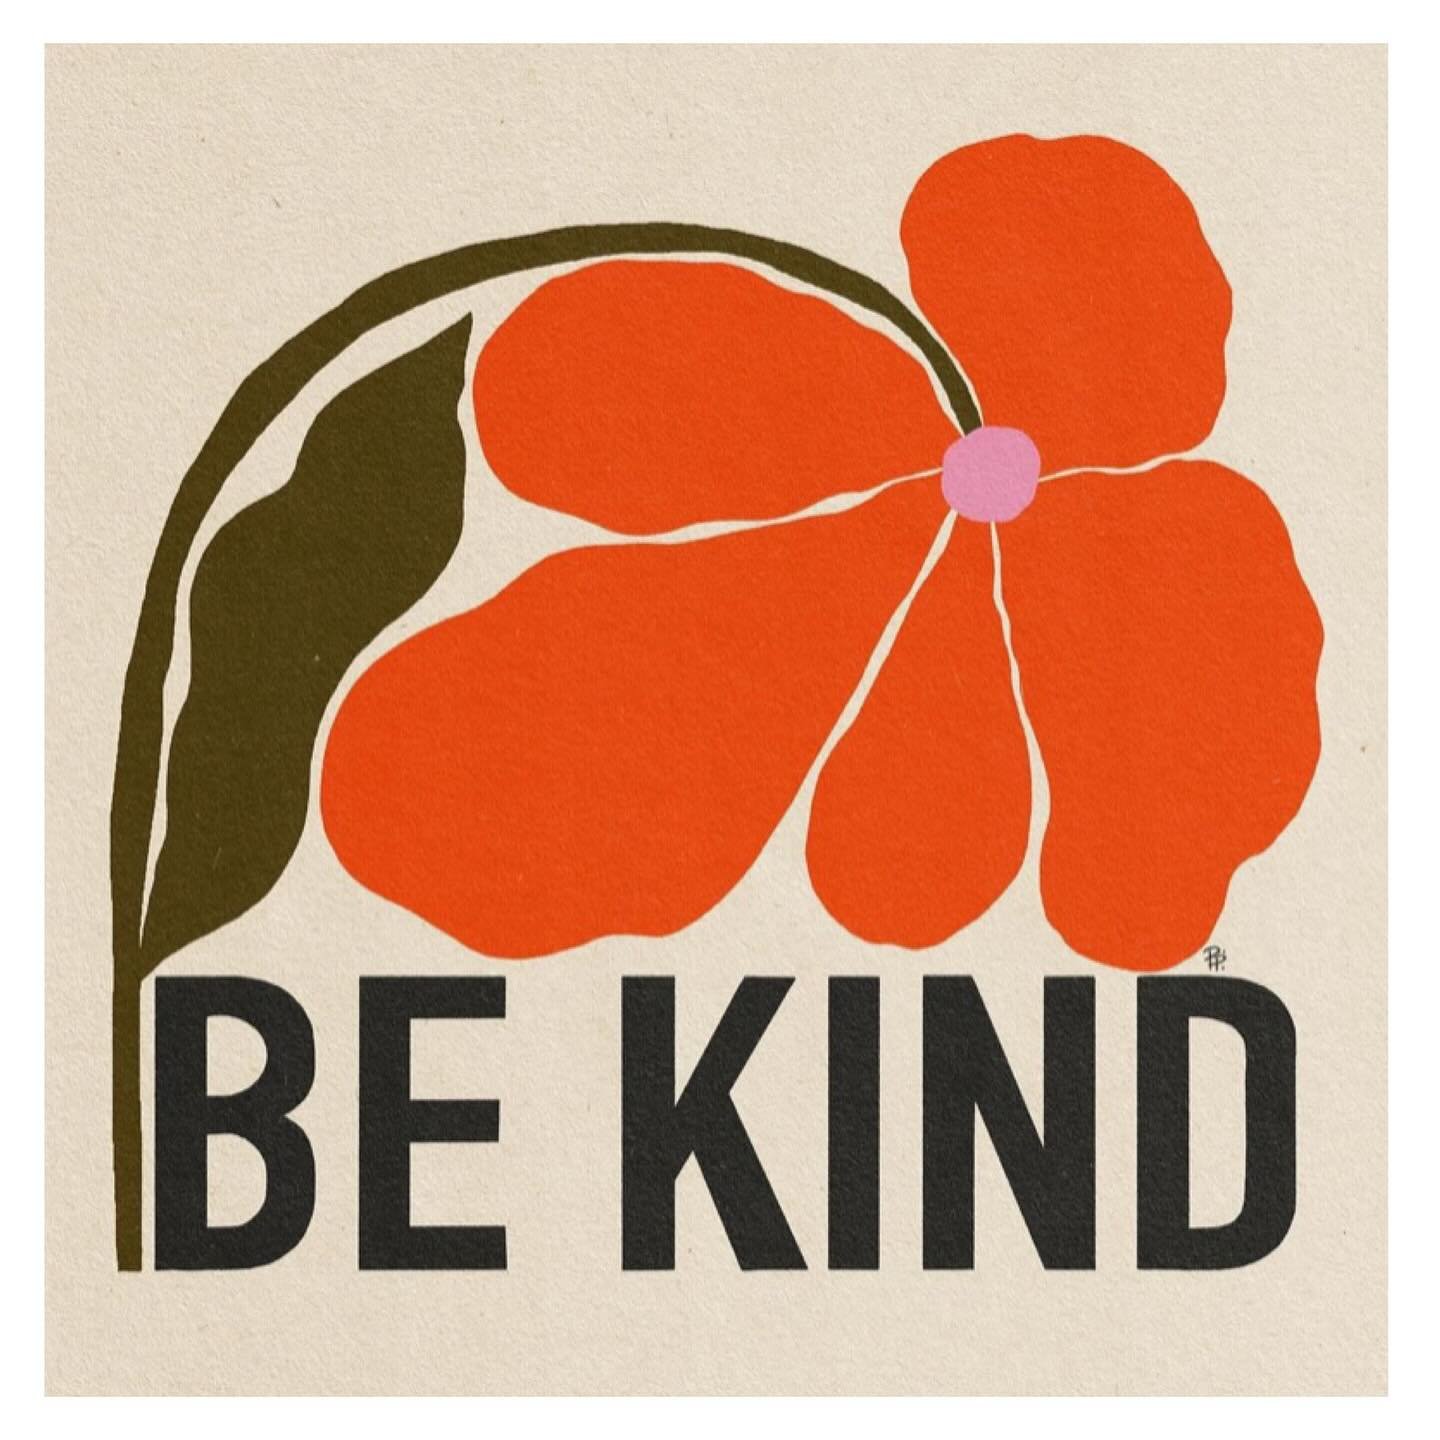 in your thoughts.
your words. 
your actions.

everyday
in every way. 🌼✌🏼

@parrottpaints 🤍 #dennisportyoga #capecodyoga #capecodwellness #bekind